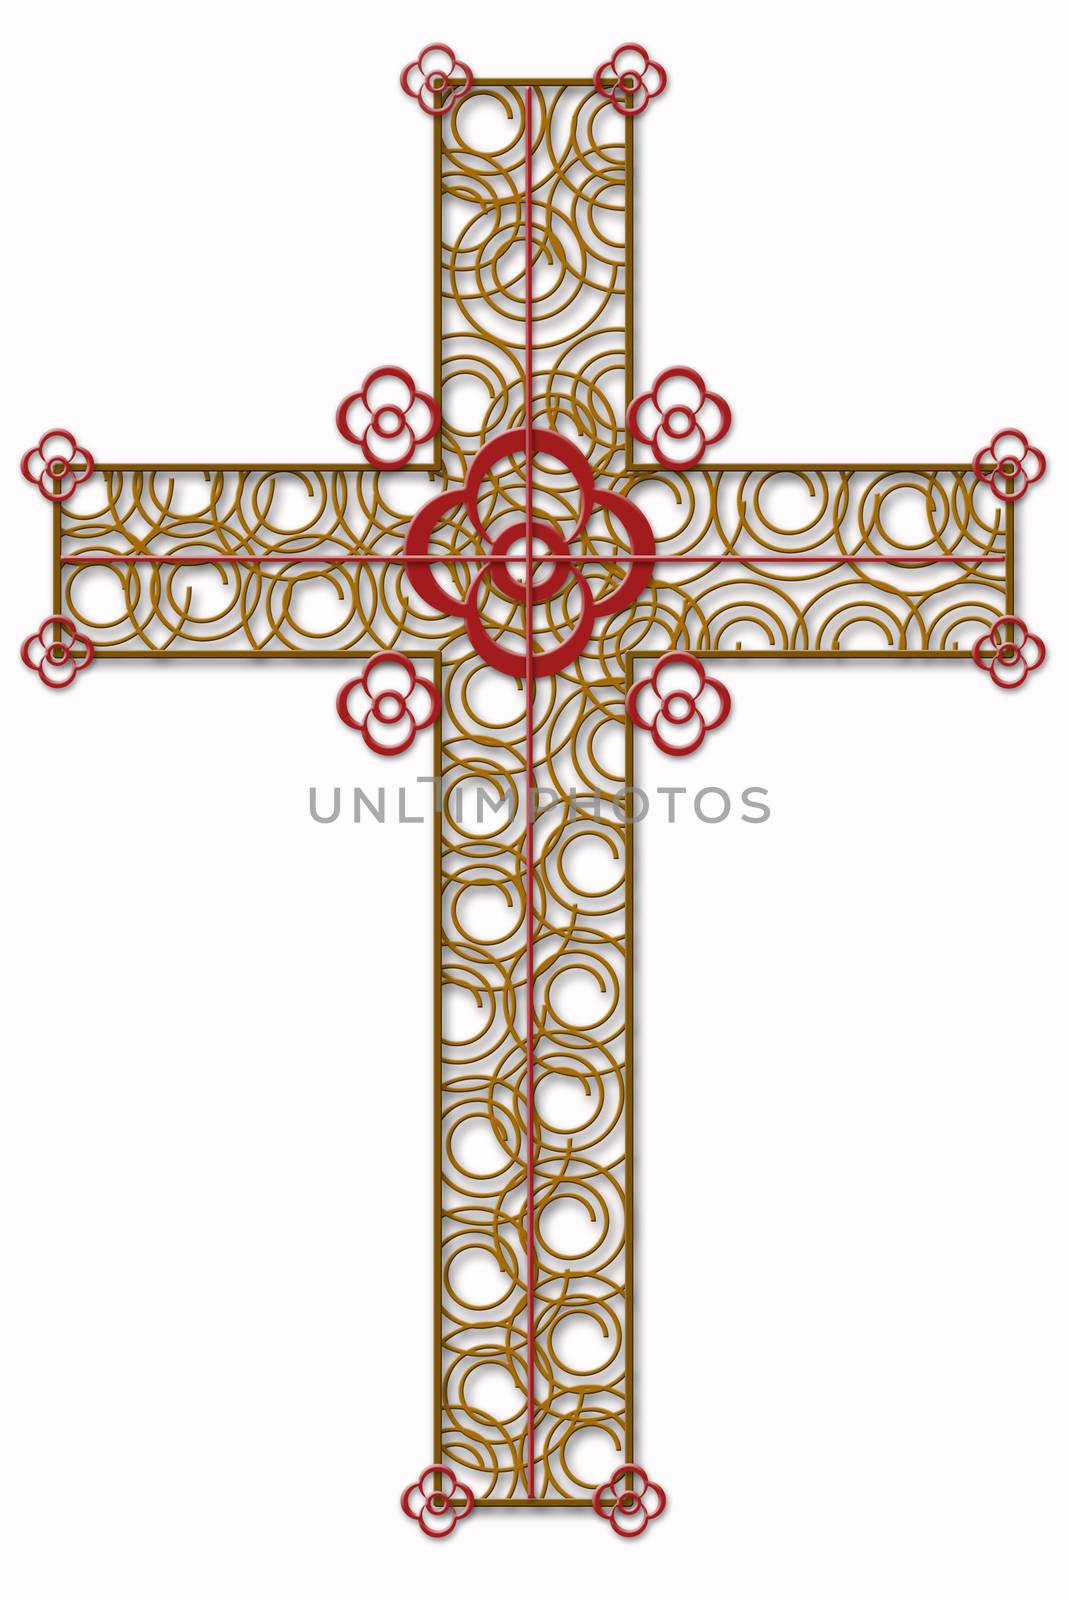 Golden  cross with red  element by vitanovski